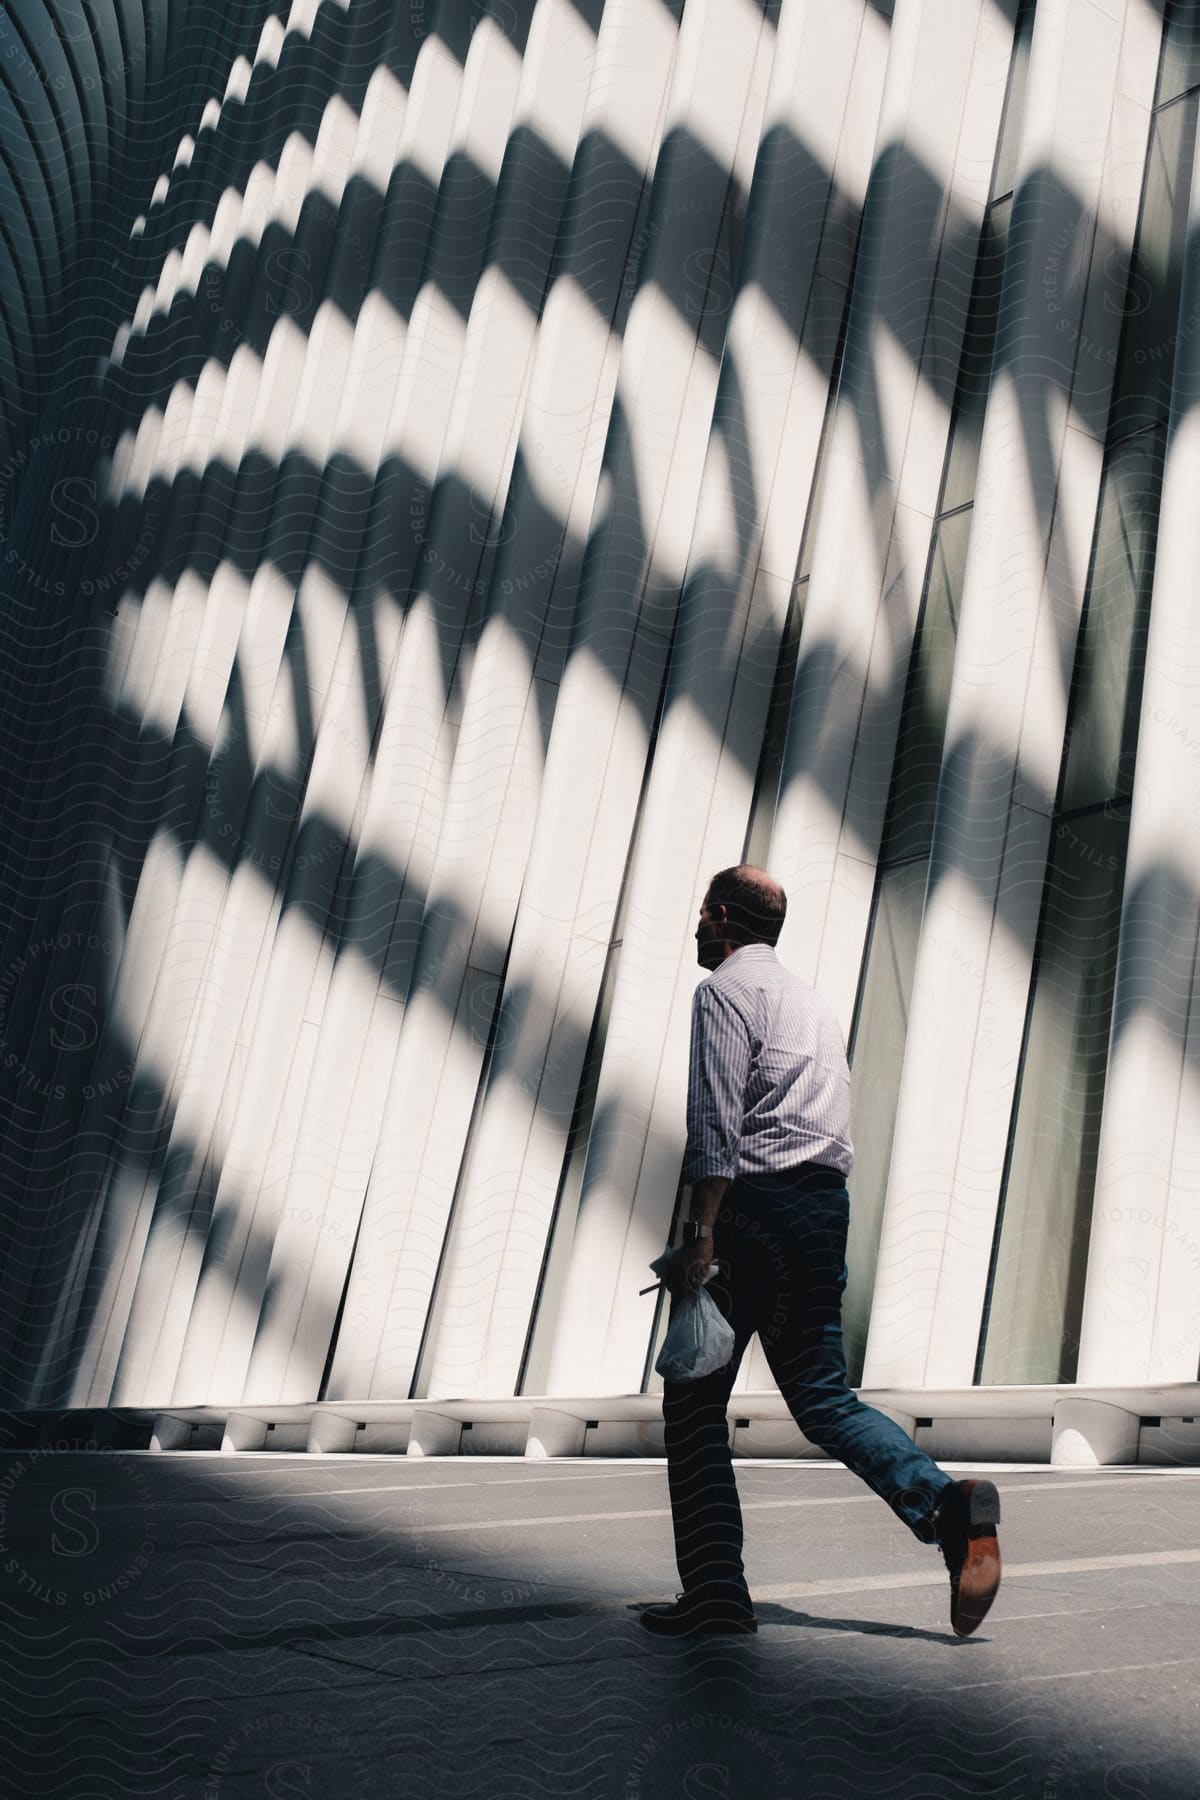 A man carrying a plastic bag is walking outside in a city near a building with modern architecture and interesting shadows being cast in the daytime.